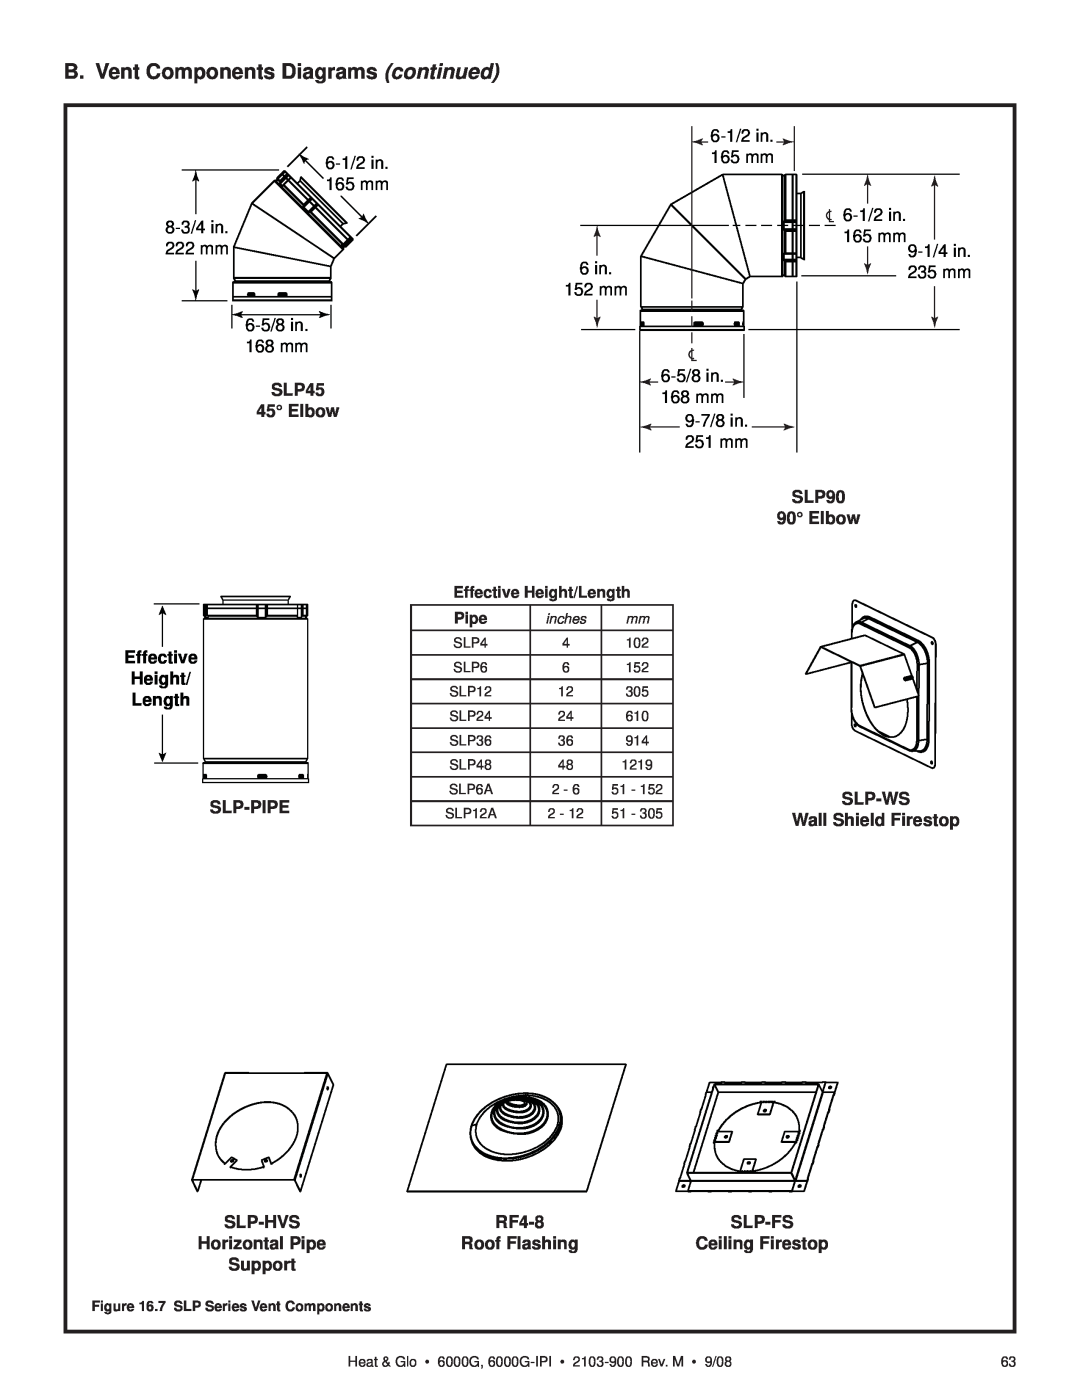 Heat & Glo LifeStyle 6000G-LP, 6000G-IPILP owner manual B. Vent Components Diagrams continued, SLP45 